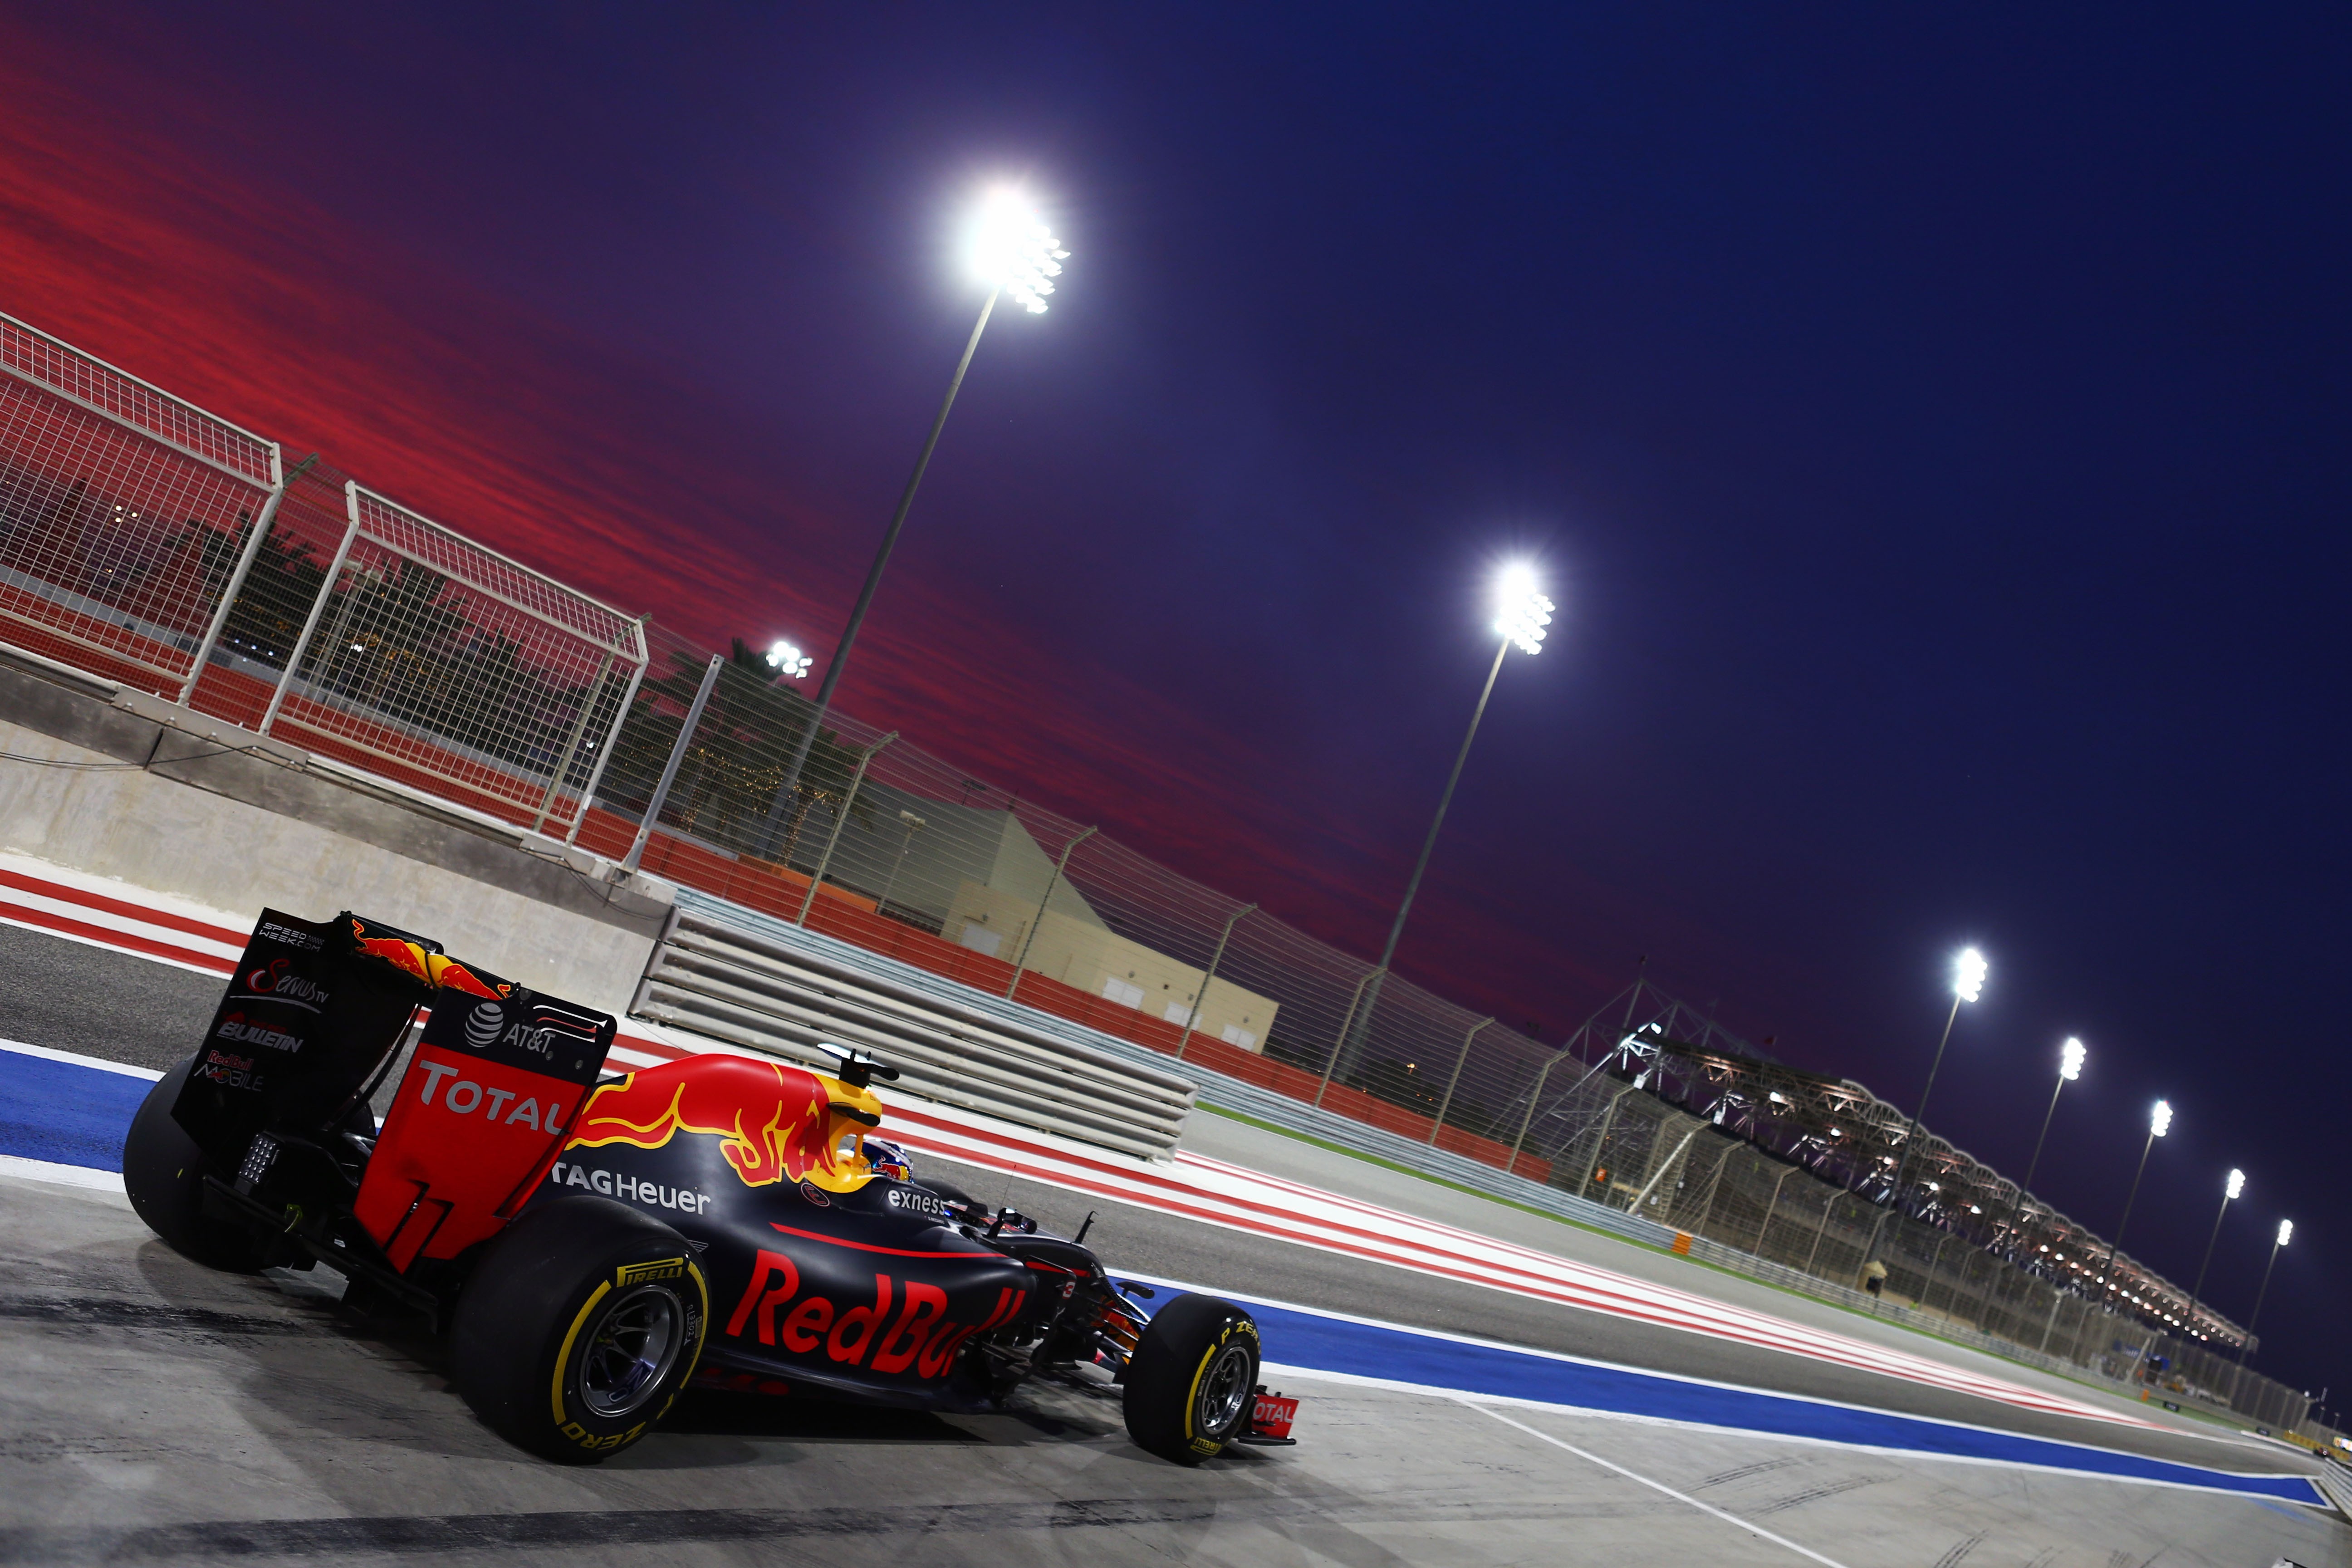 Wallpaper, sports, night, car, vehicle, drink, Formula Red Bull Racing, structure, 5184x3456 px, sport venue, race track, auto racing 5184x3456